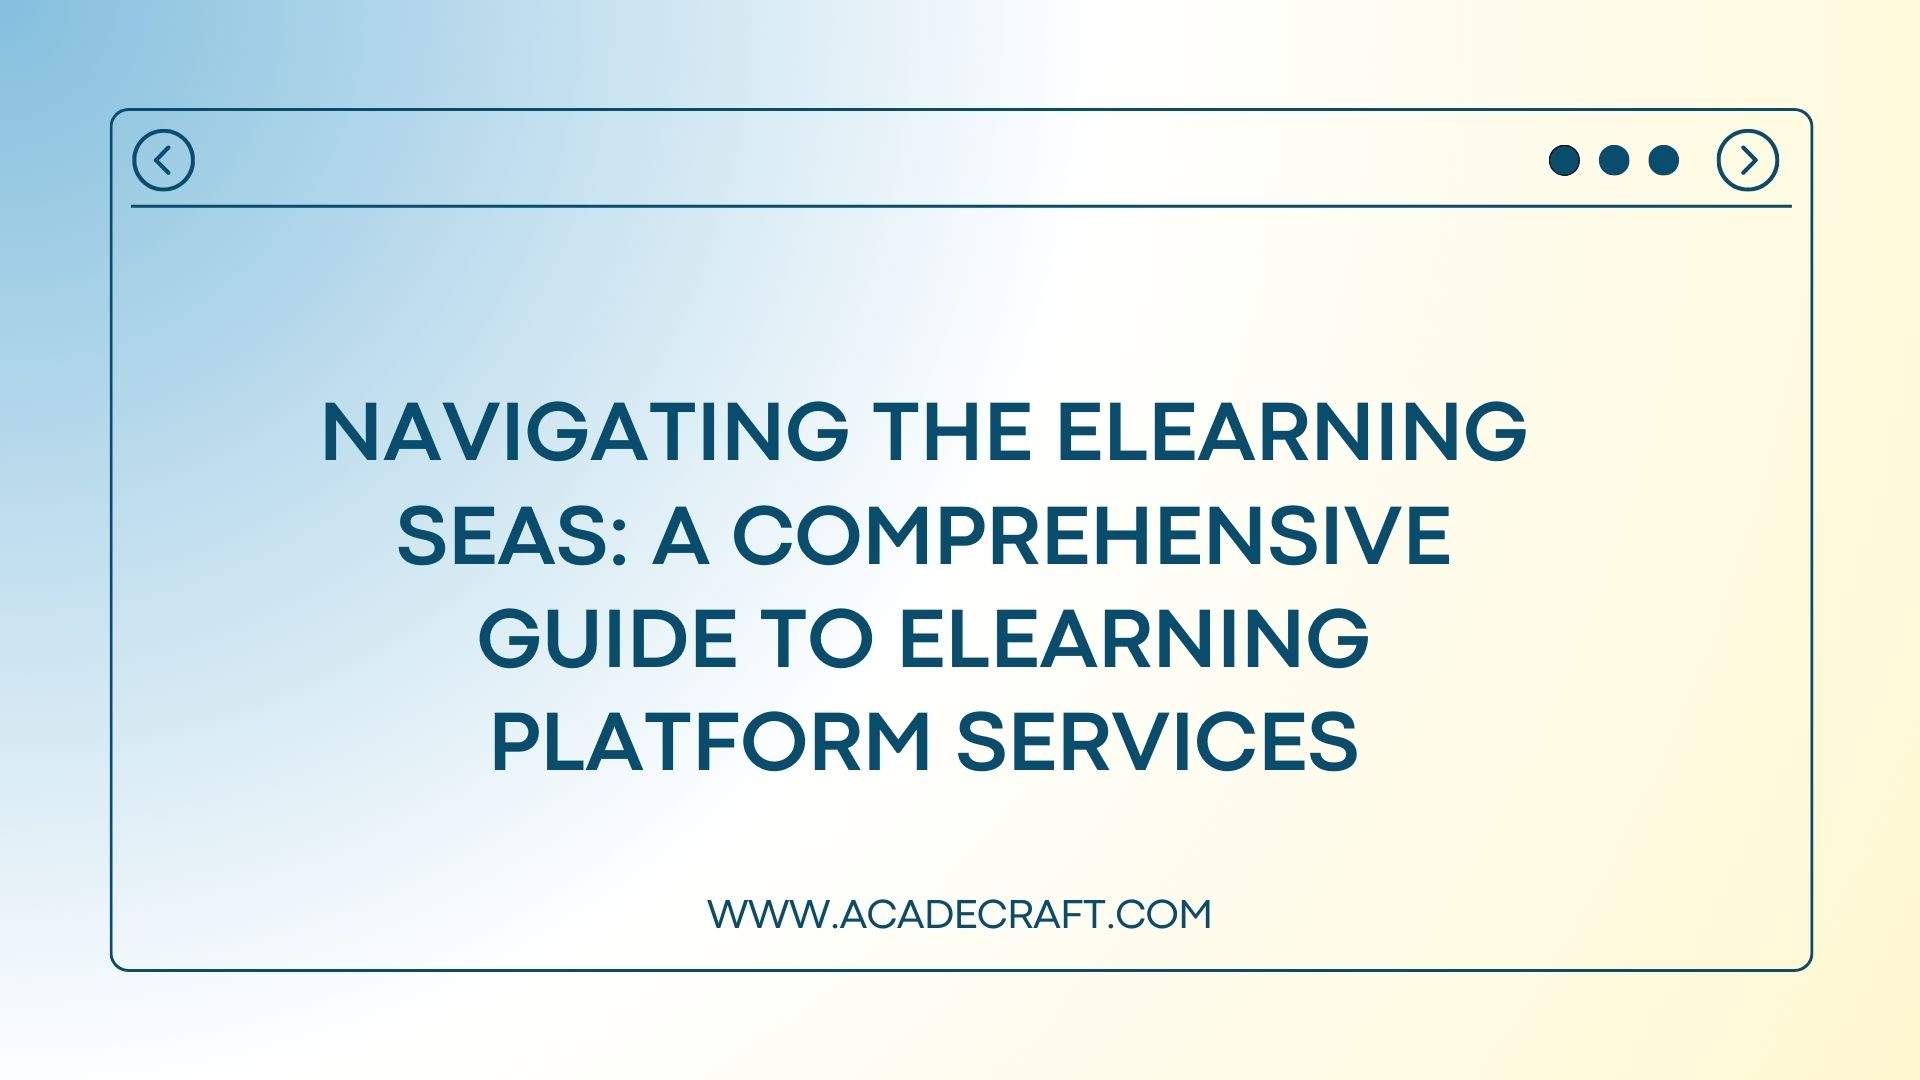 A Comprehensive Guide to eLearning Platform Services